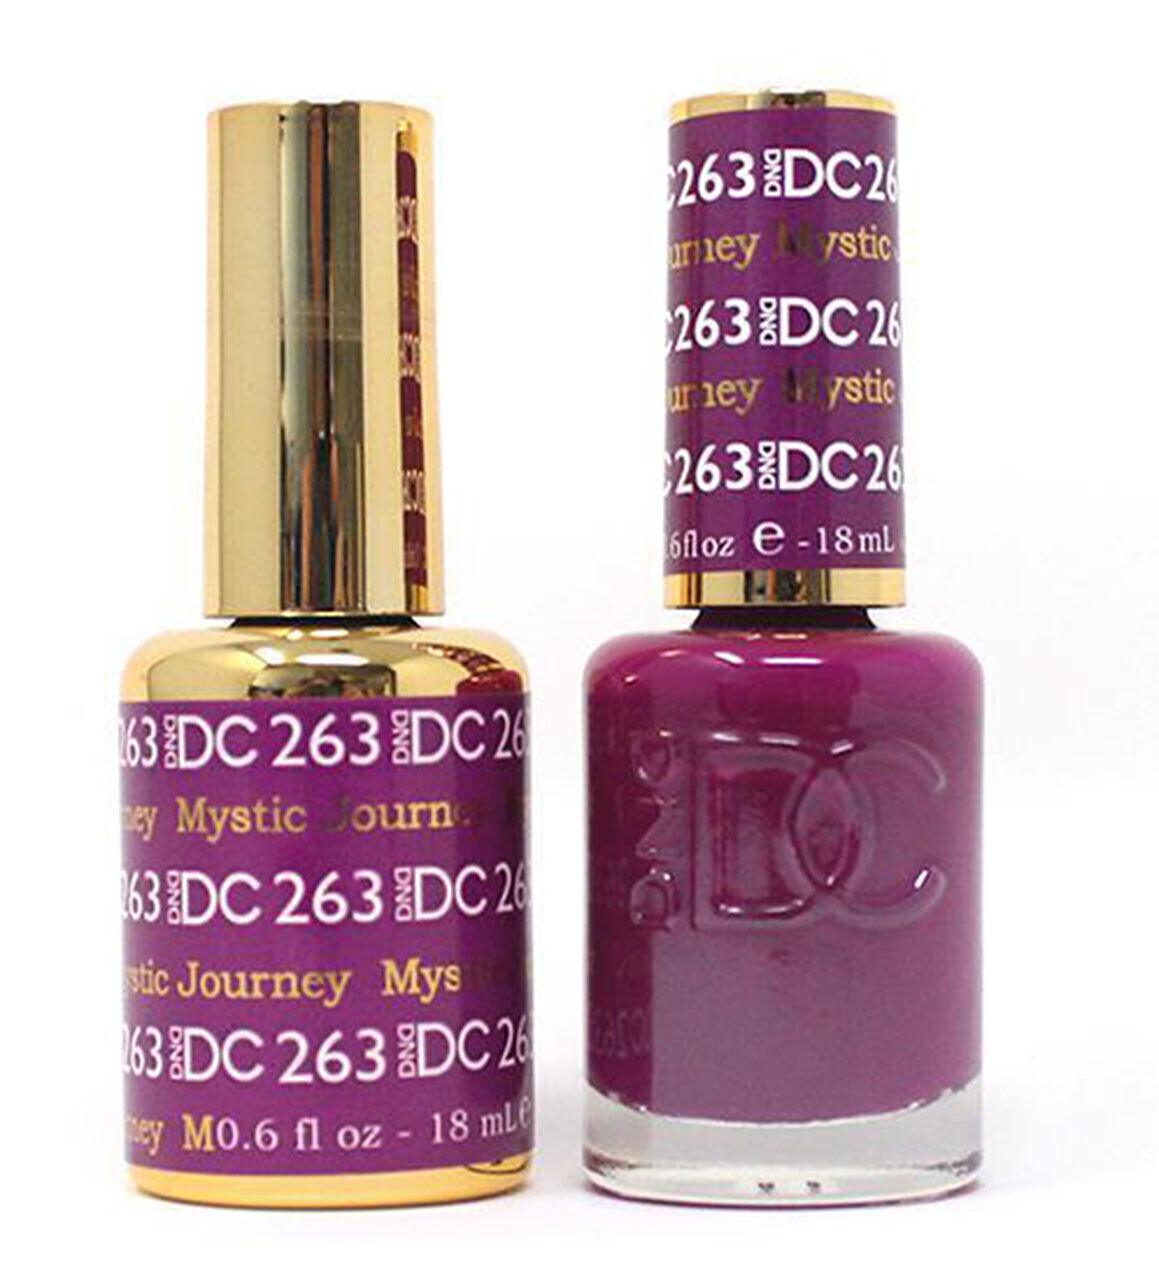 DND DC - Gel Polish & Matching Nail Lacquer Set - #263 MYSTIC JOURNEY